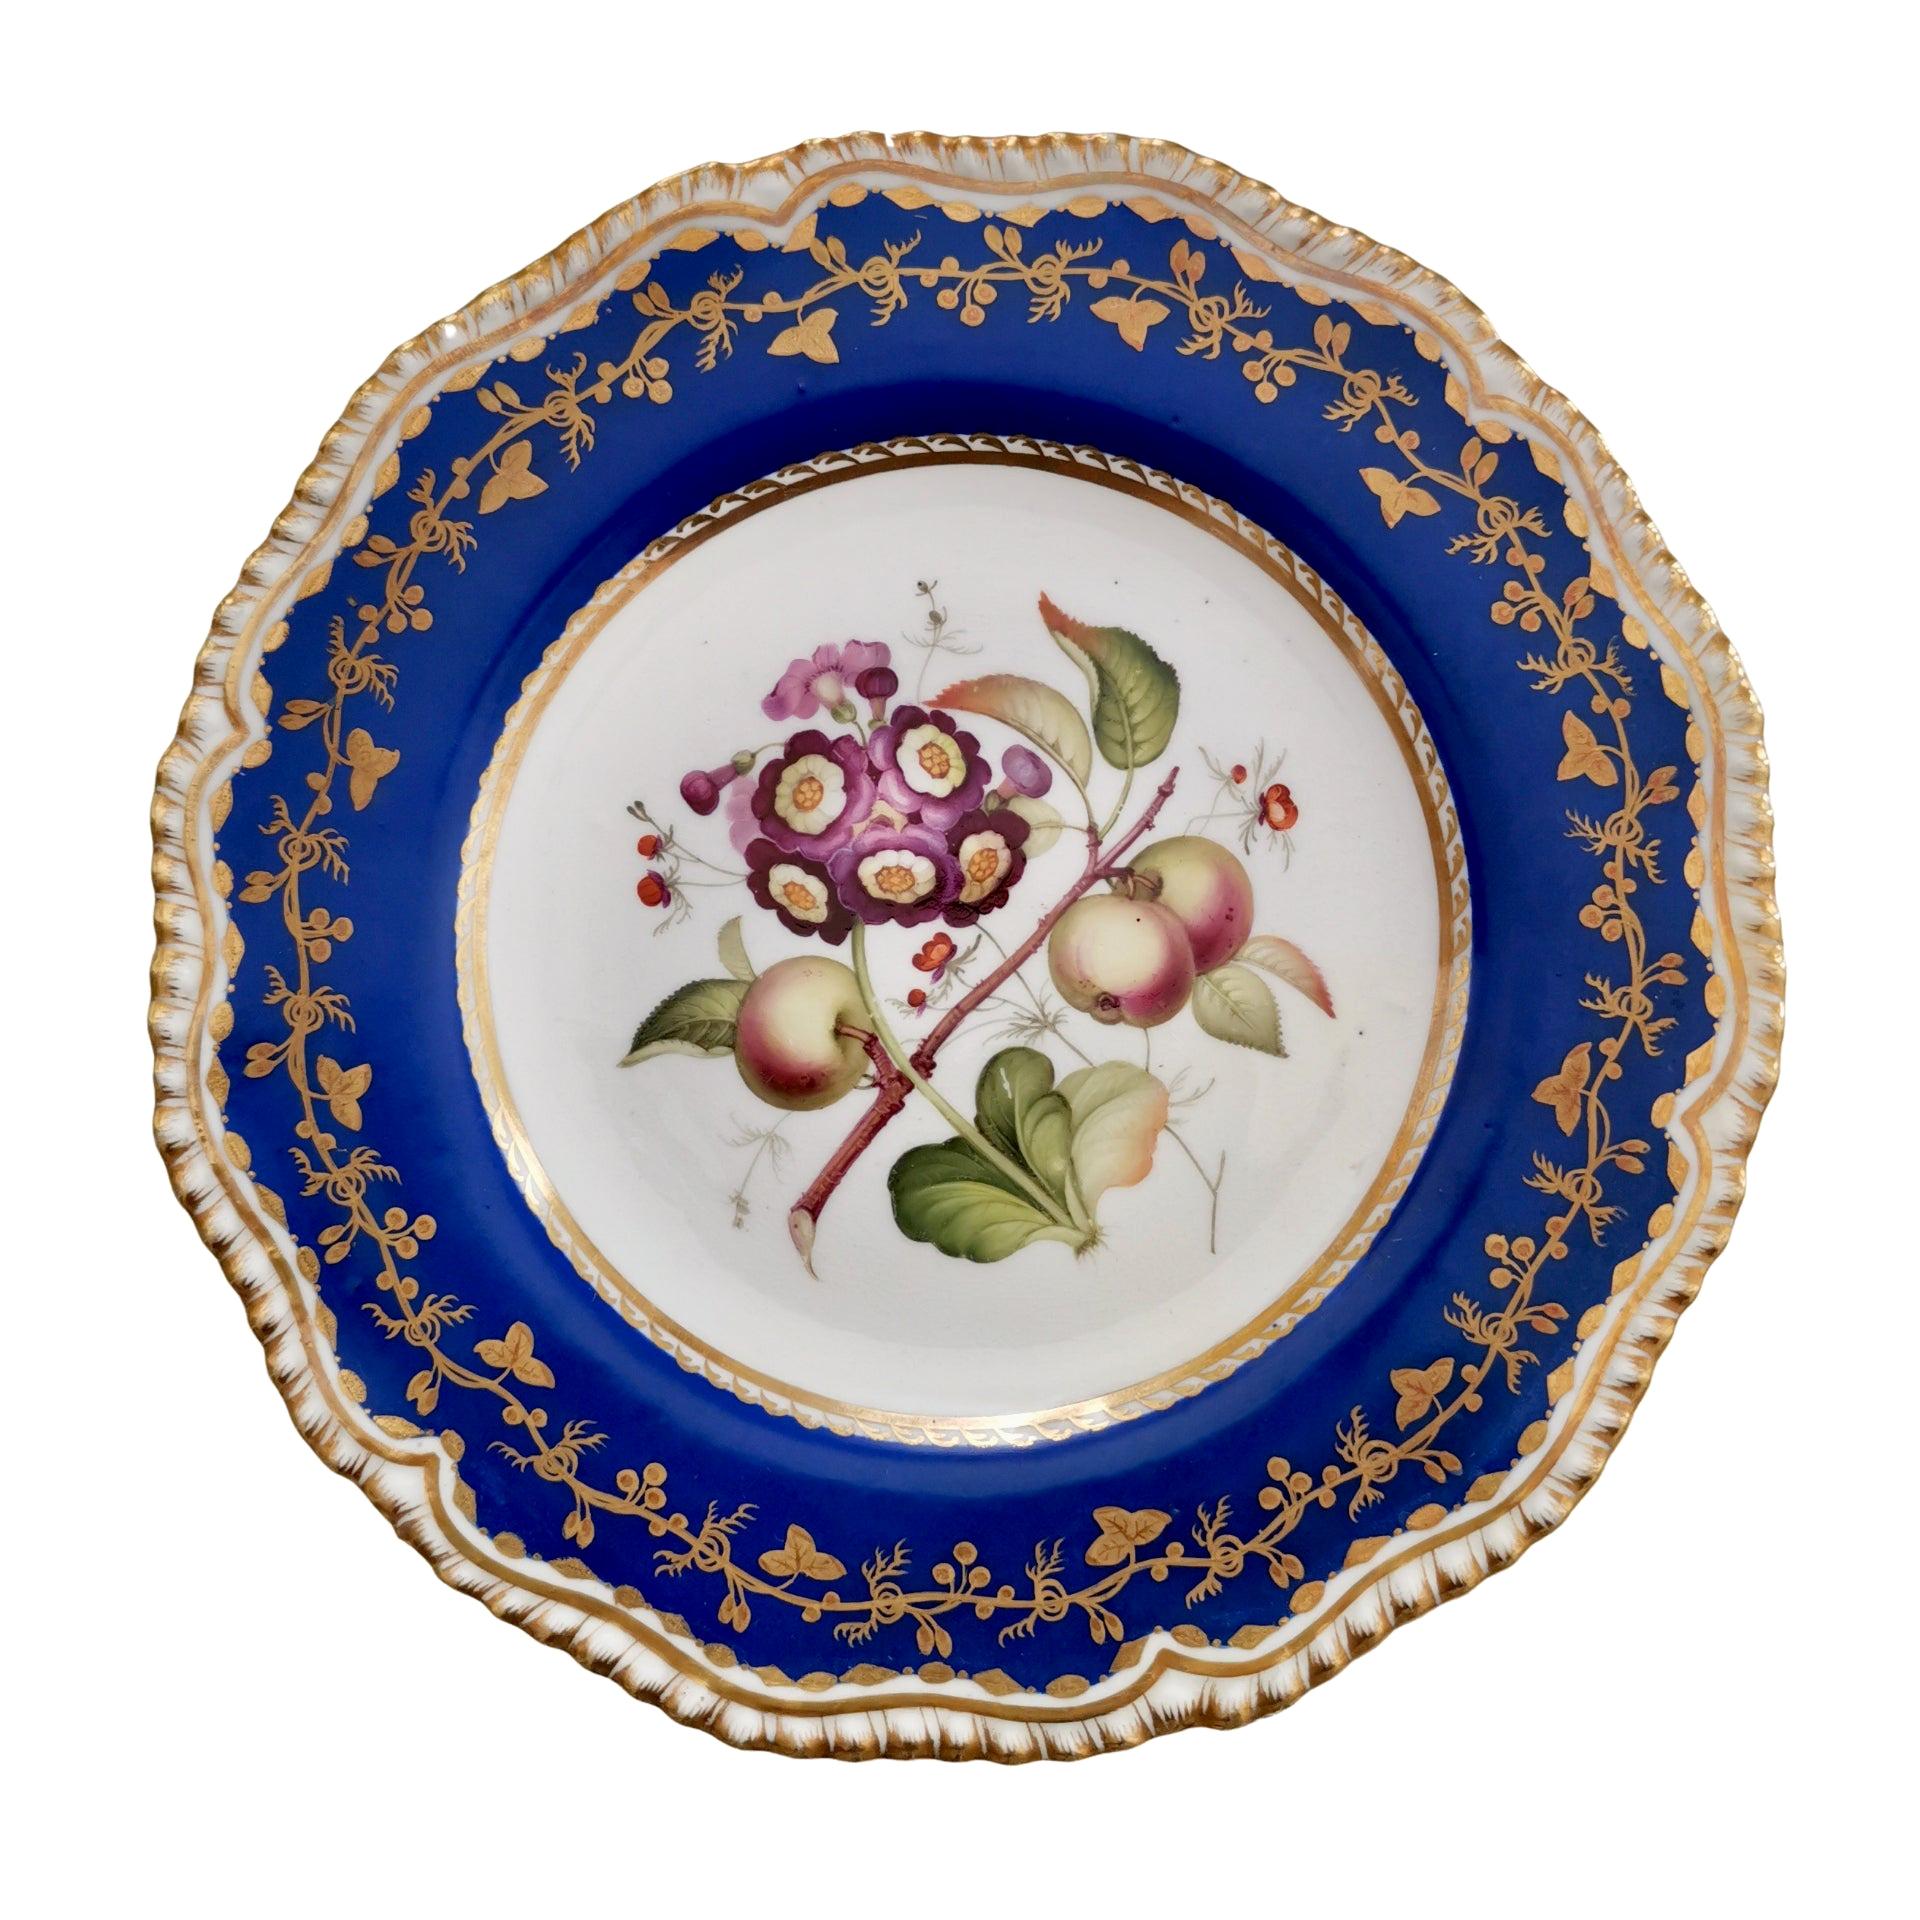 Coalport Porcelain Plate, Blue with Auriculas and Apples, ca 1830